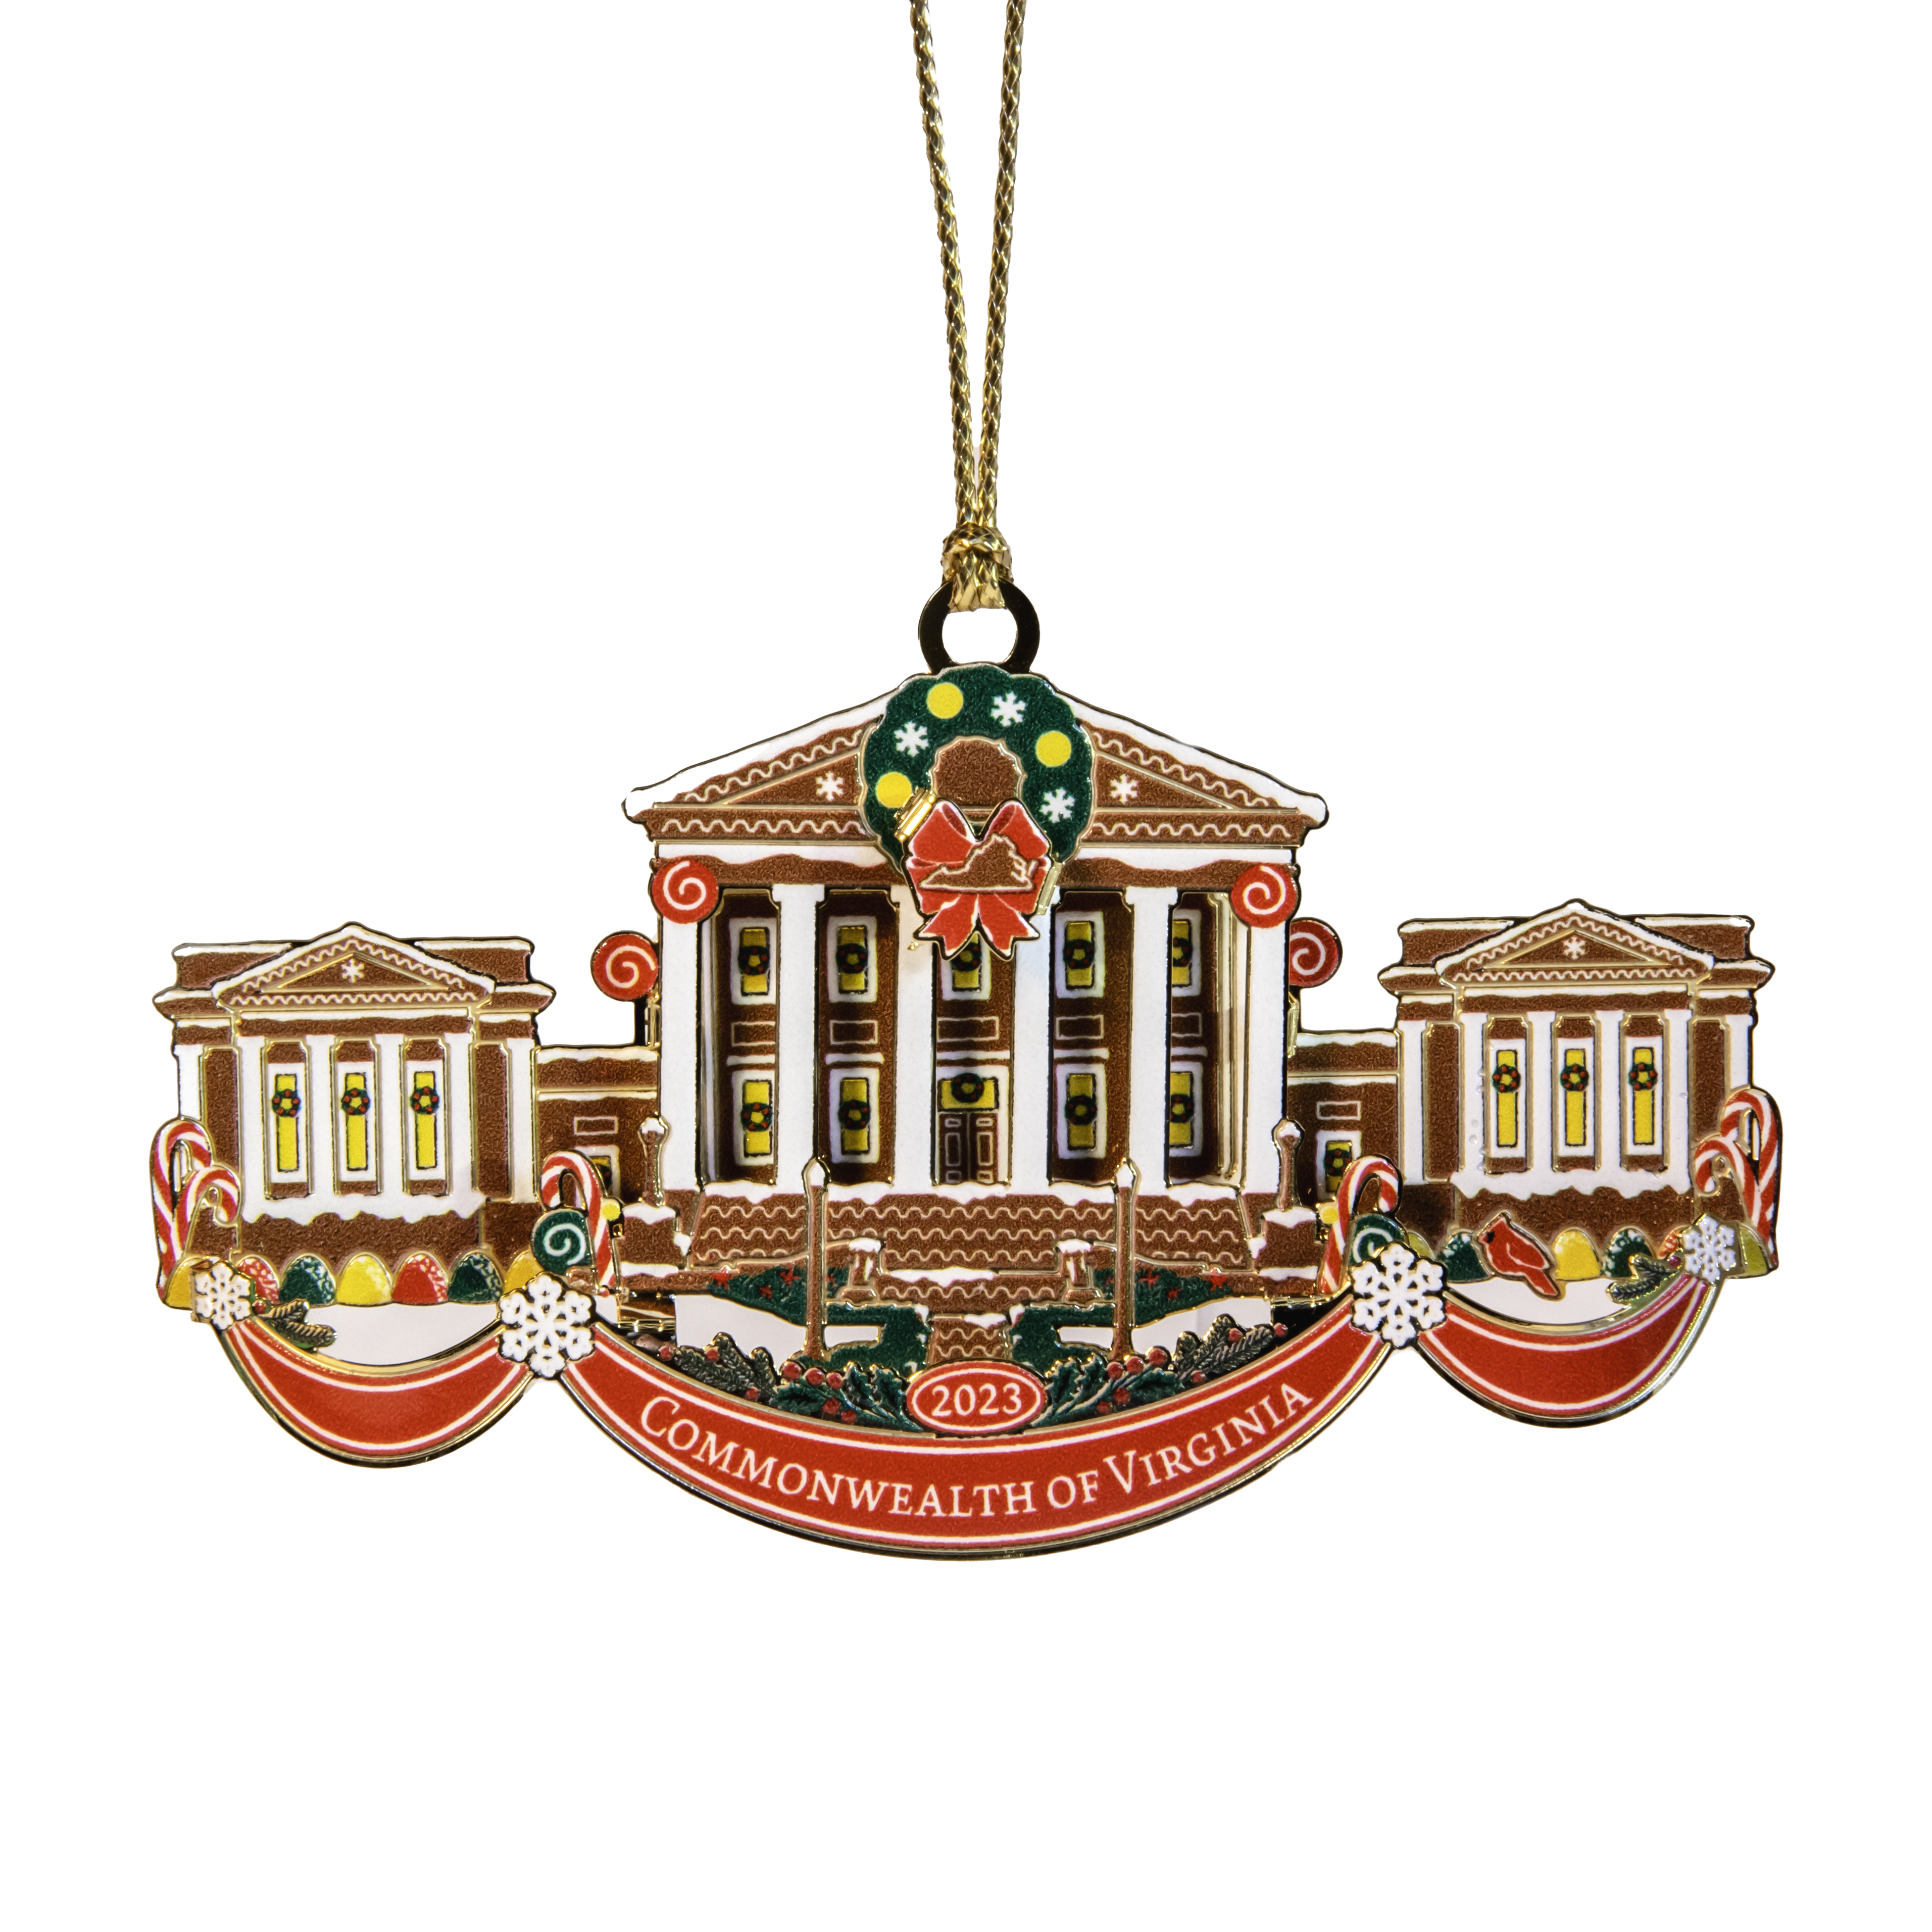 Christmas tree ornament: the Virginia state capitol depicted in gingerbread, icing, and candy